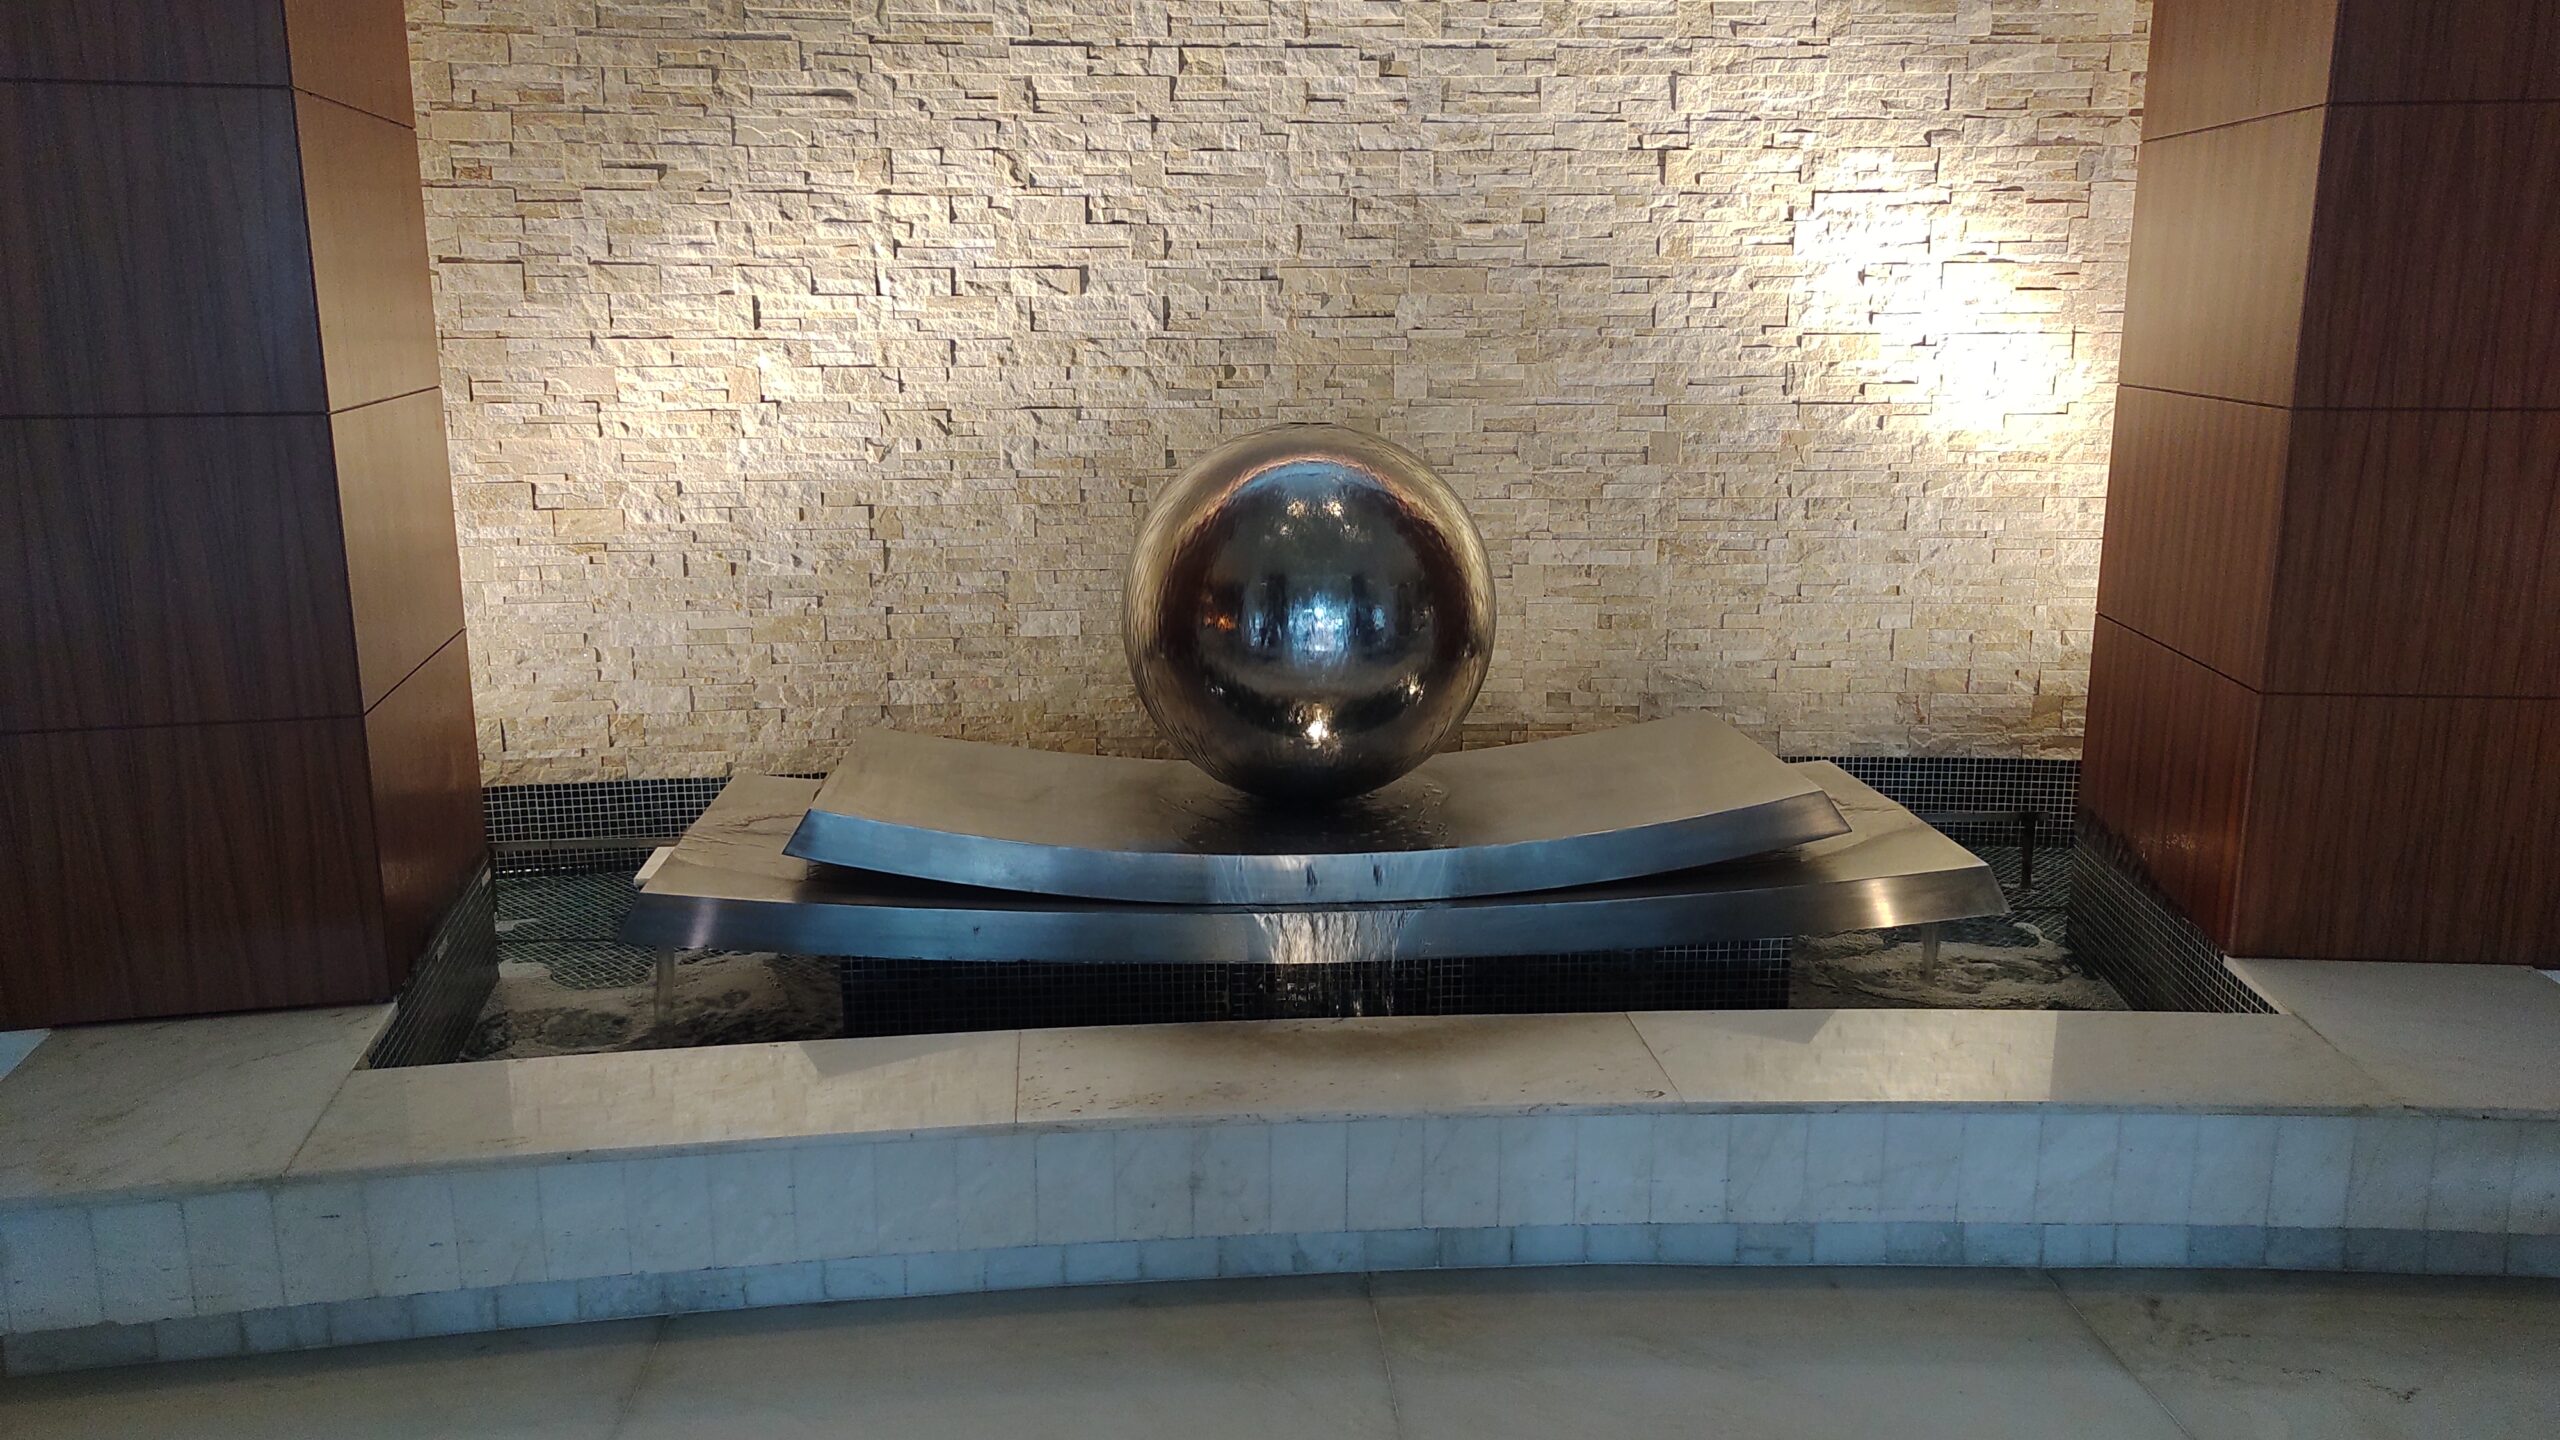 PICTURE OF THE WATER FOUNTAIN BY THE SPA.